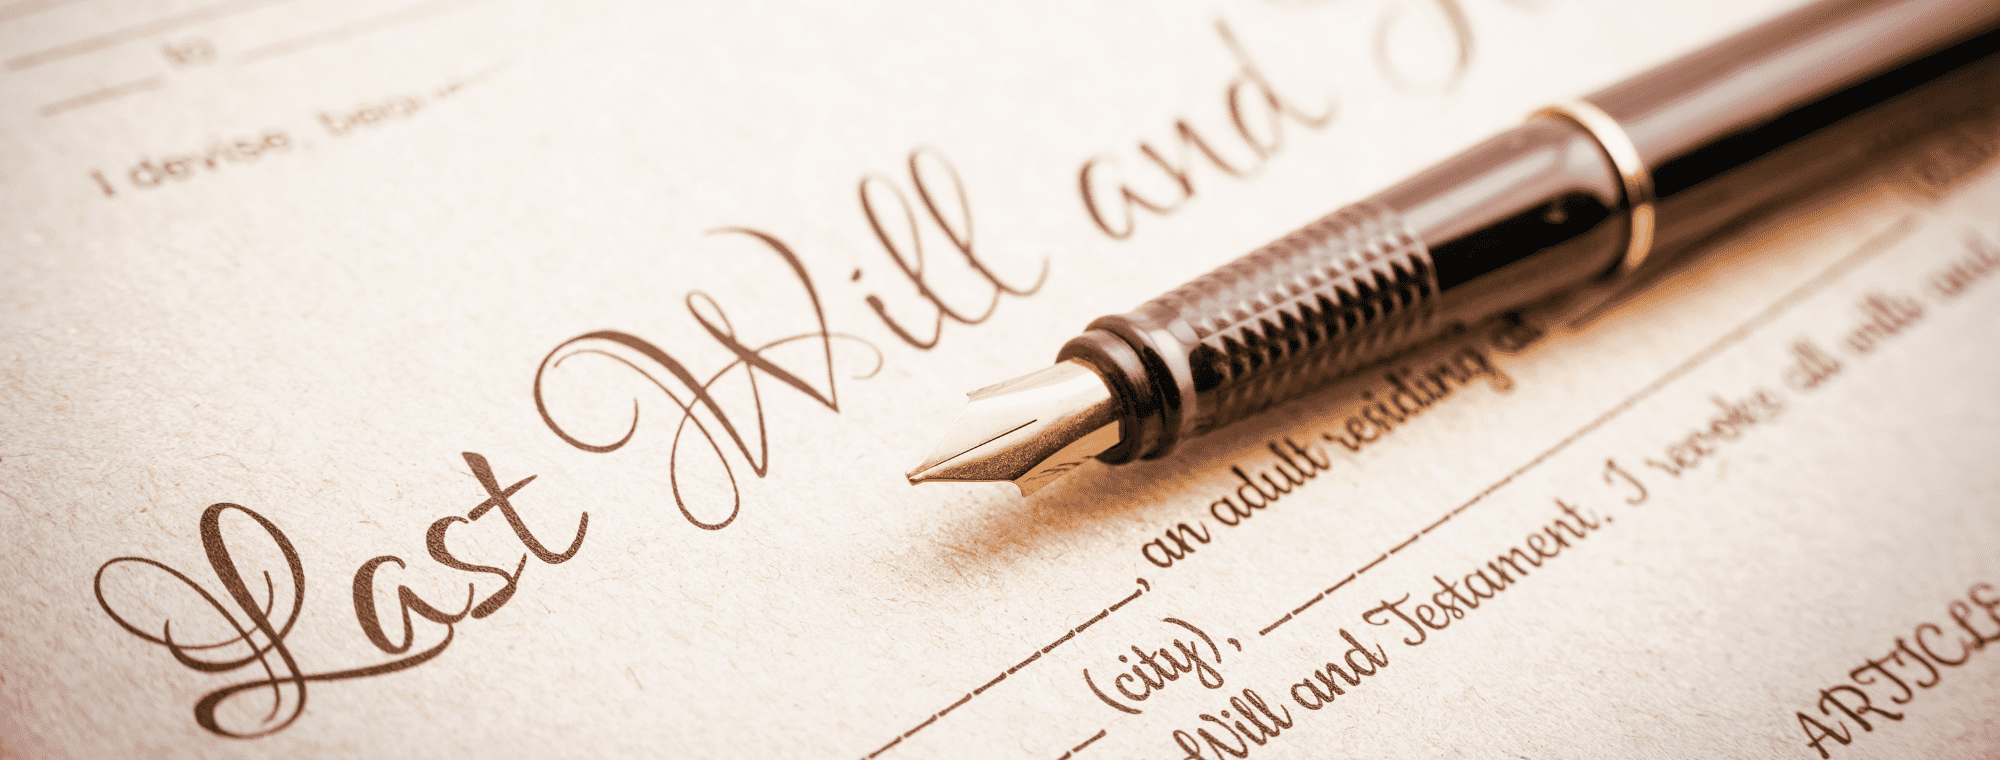 How to Choose the Executor of Your Will